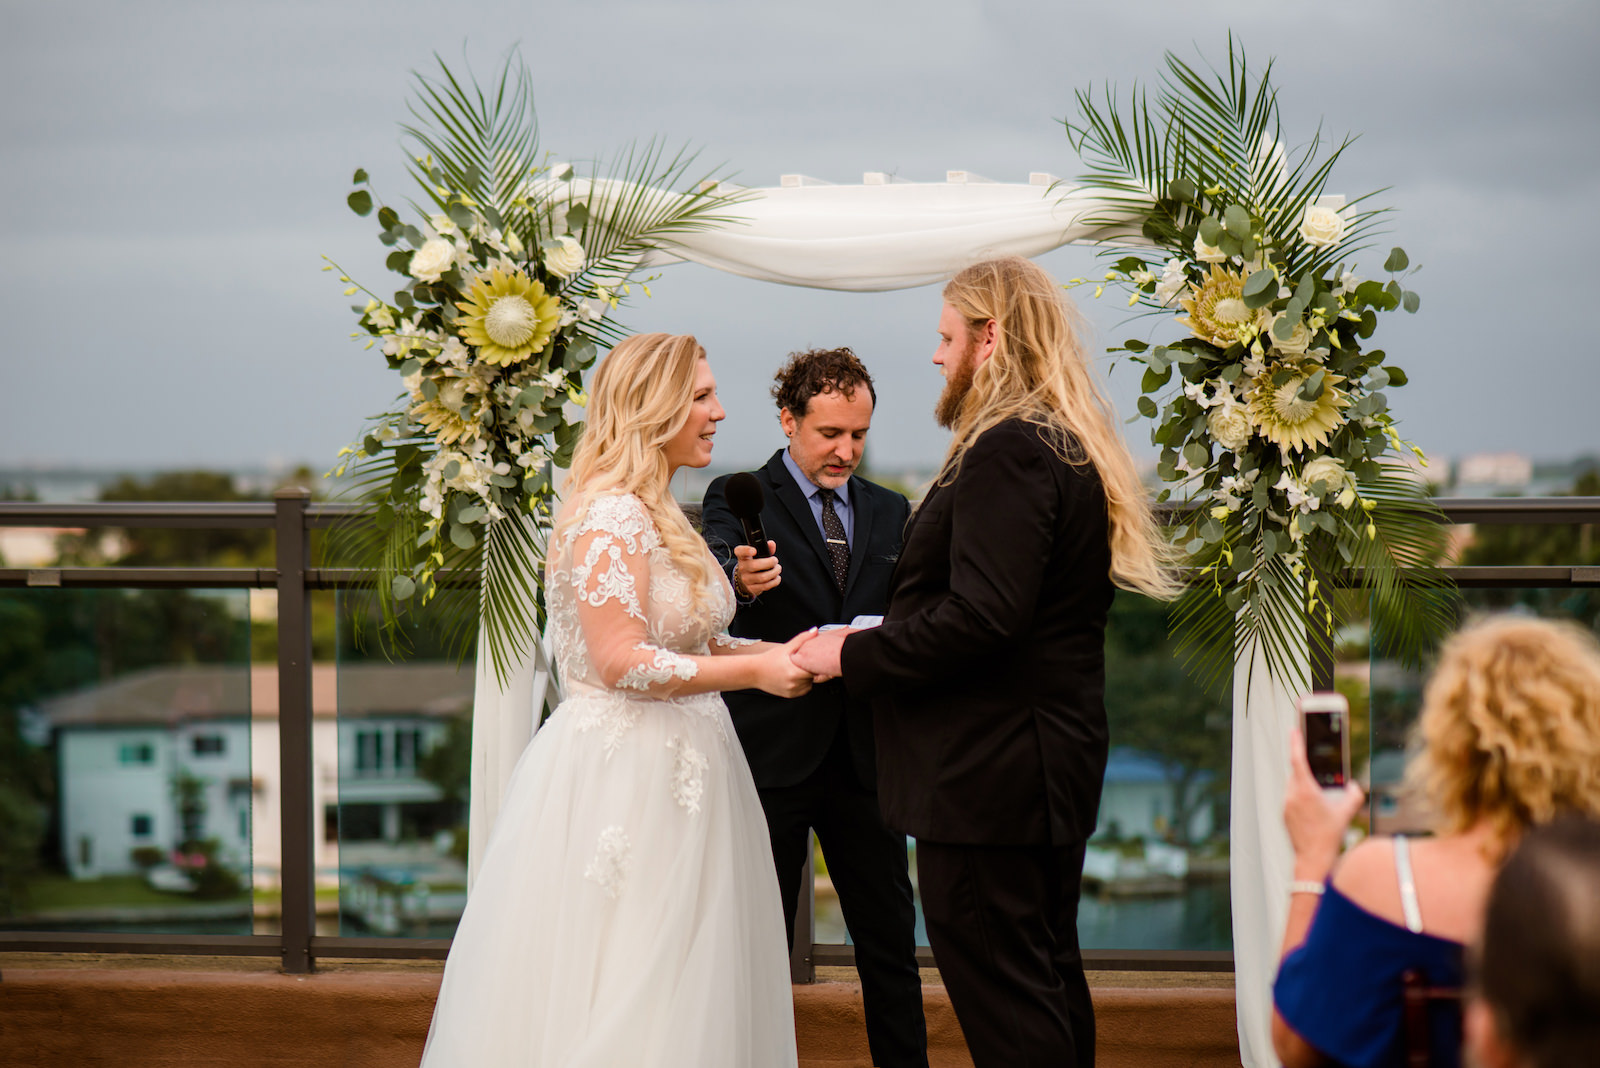 Florida Bride and Groom Exchanging Rooftop Wedding Ceremony Vows Under Arch with White Draping, Lush Neutral Tropical Boho Floral Arrangements, King Proteas, White Florals, Palm Fronds, Eucalyptus | Tampa Bay Wedding Planner Perfecting the Plan | Wedding Florist Iza's Flowers | St. Pete Waterfront Wedding Venue The Hotel Zamora